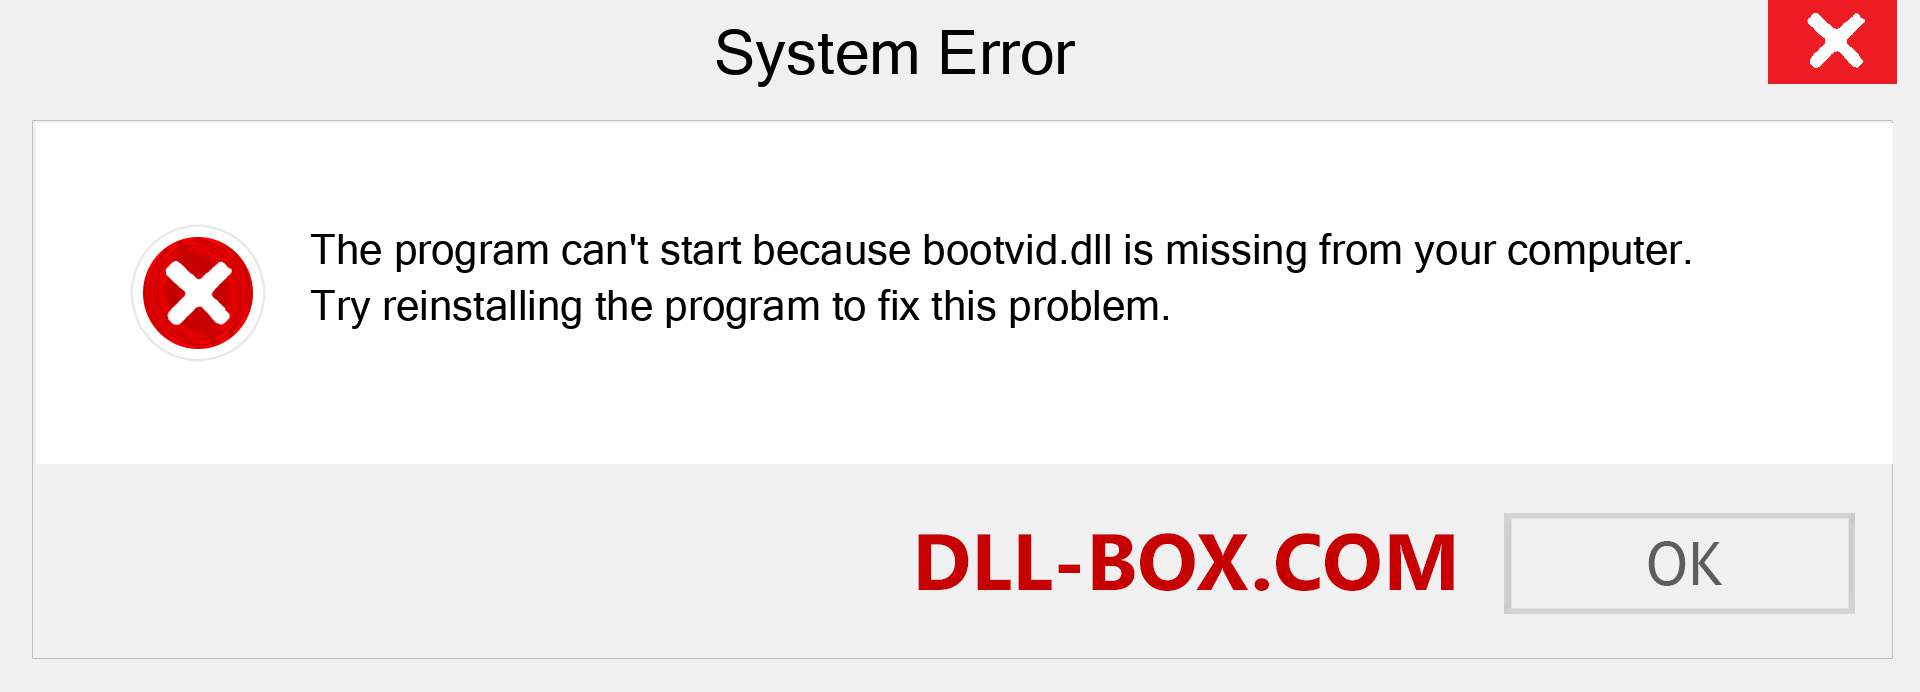  bootvid.dll file is missing?. Download for Windows 7, 8, 10 - Fix  bootvid dll Missing Error on Windows, photos, images